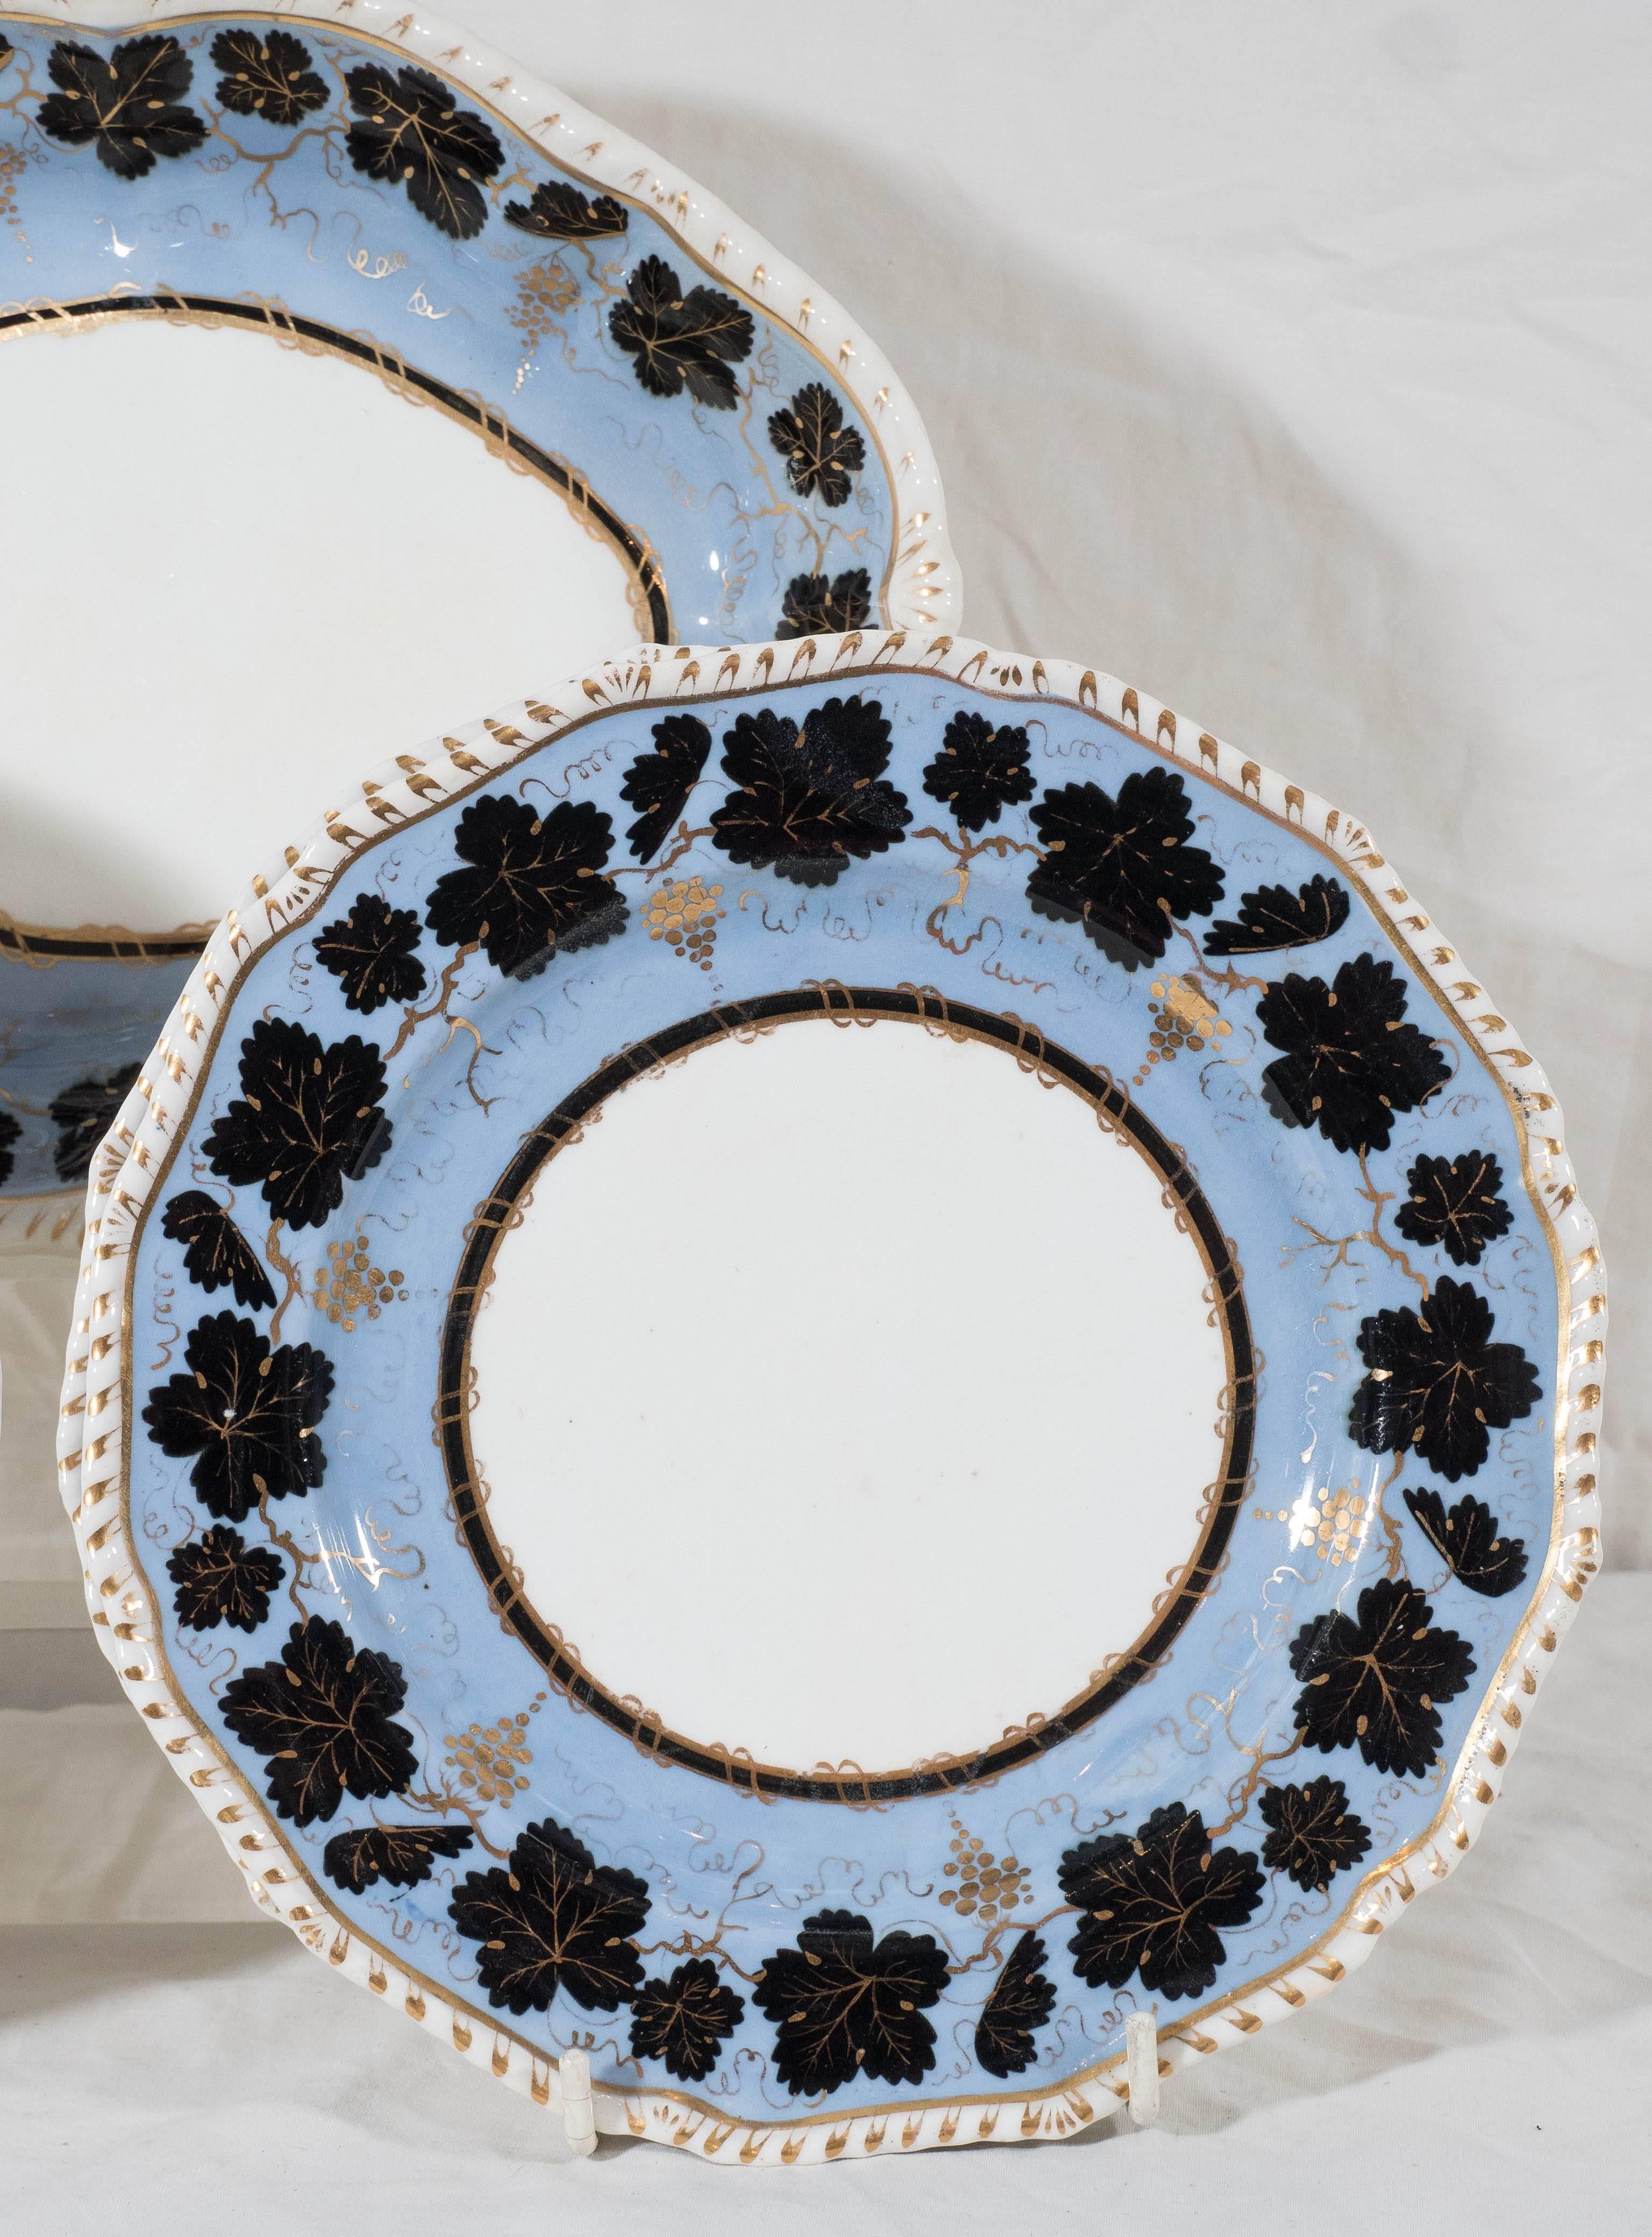 Regency Antique Porcelain Light Blue Dishes Painted with Black Leaves (13 pieces NOT 15)